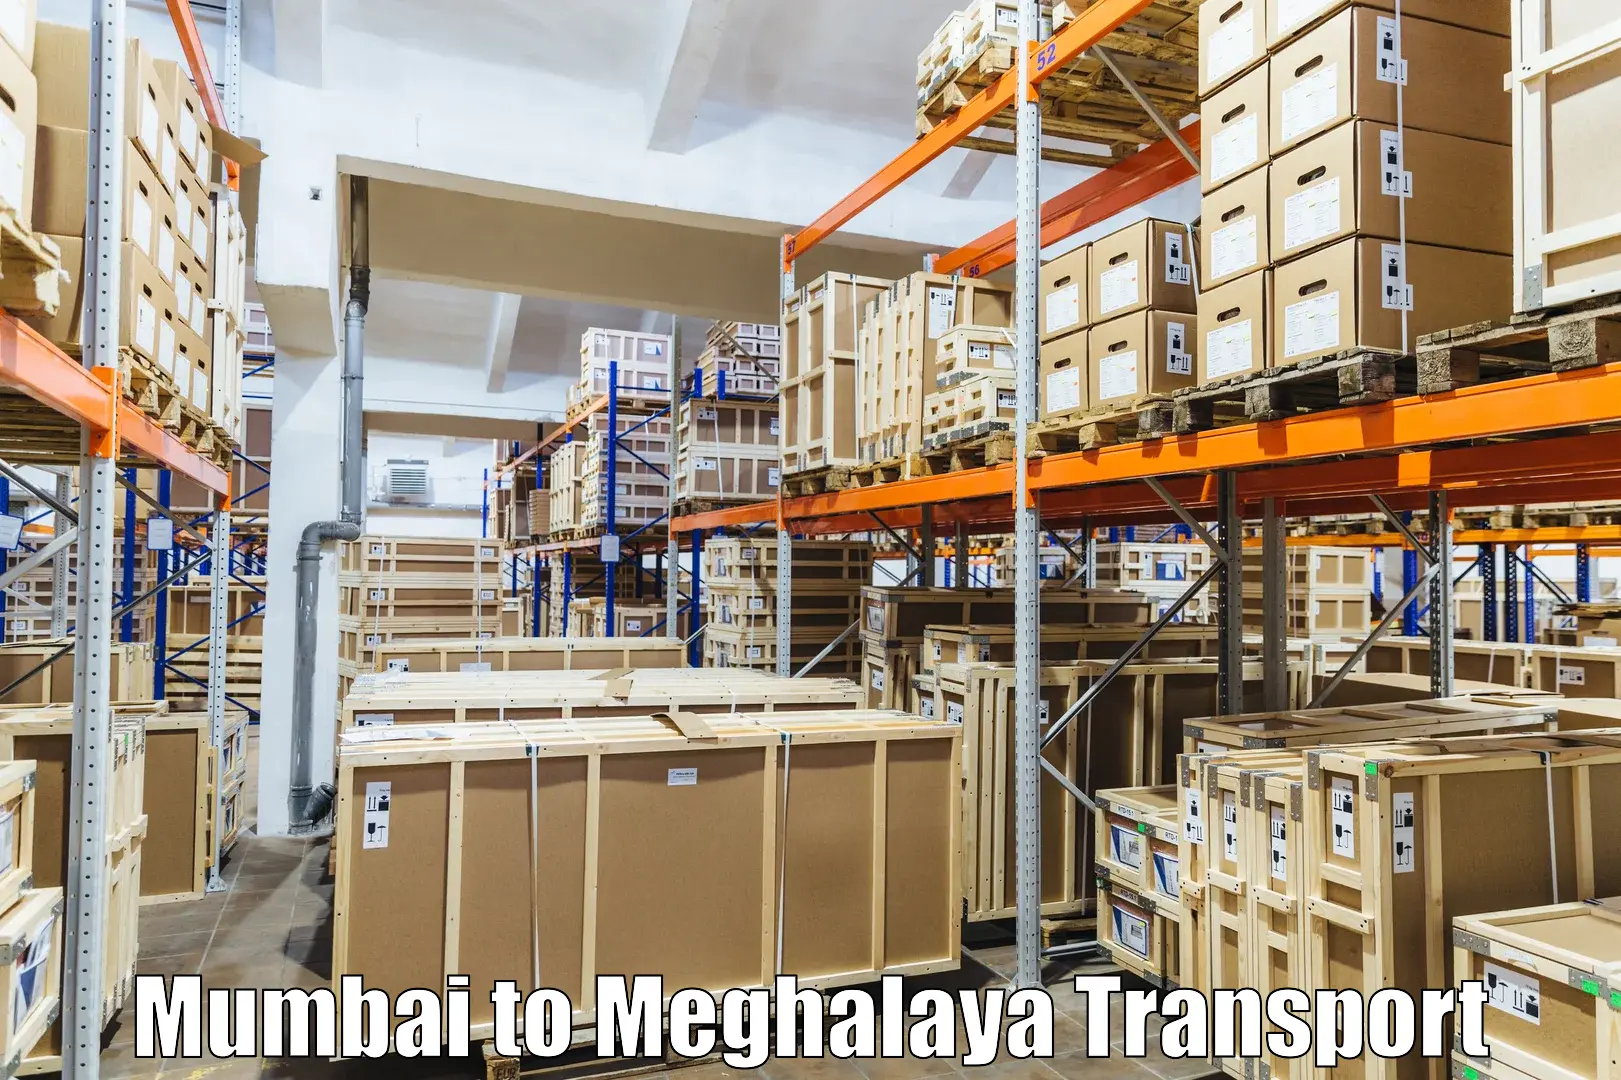 Road transport online services Mumbai to Nongstoin